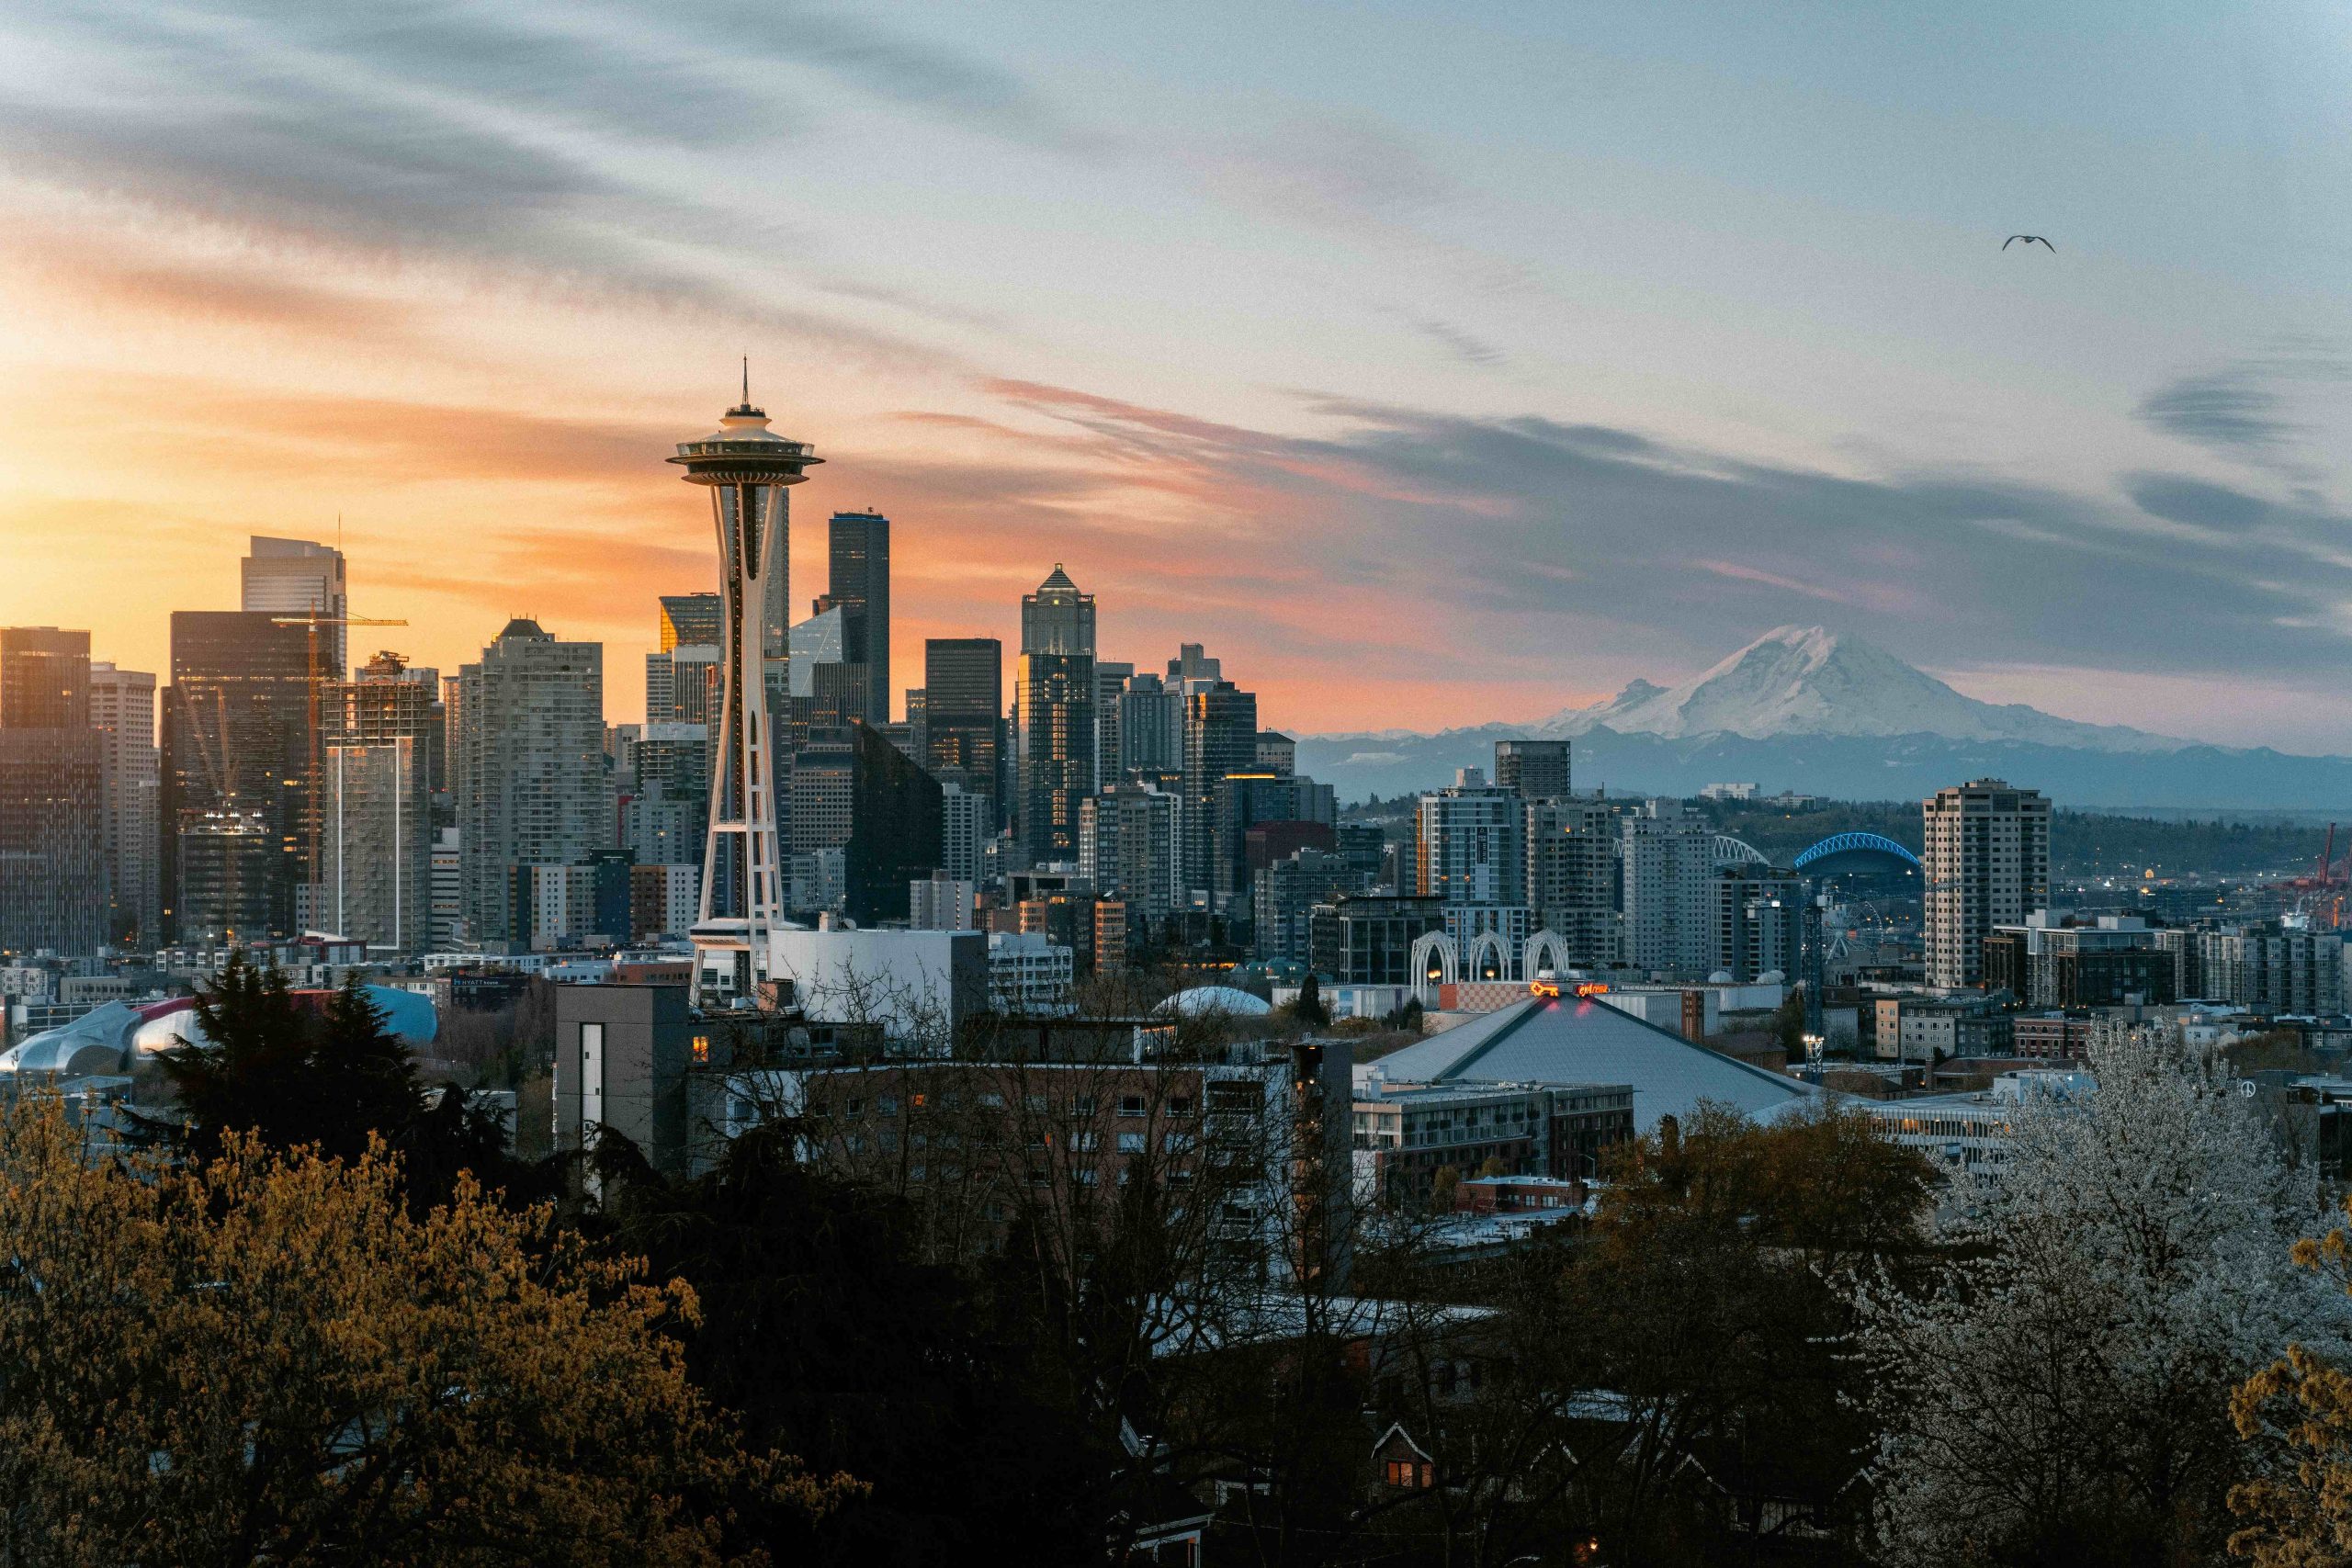 Image of space needle and Seattle skyline